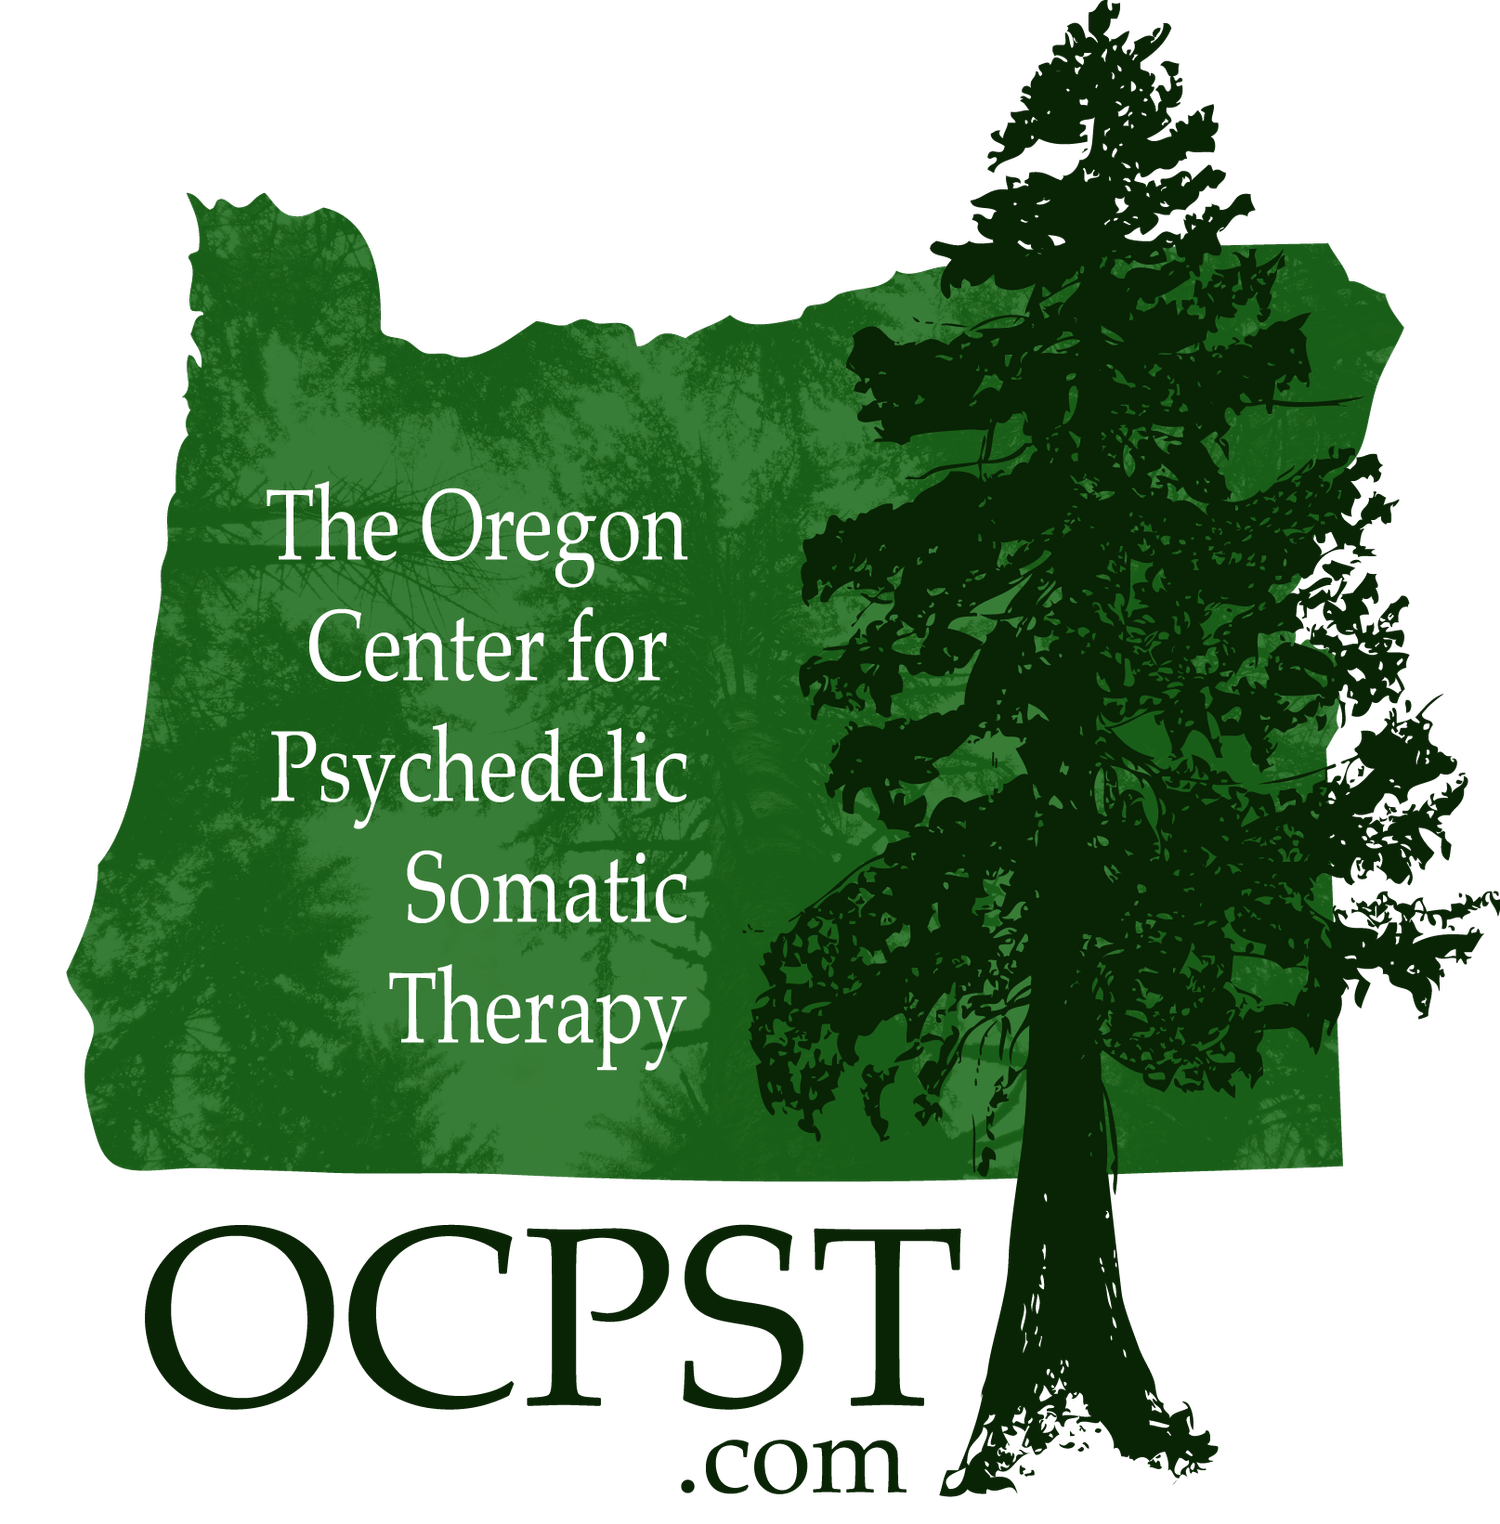 The Oregon Center for Psychedelic Somatic Therapy